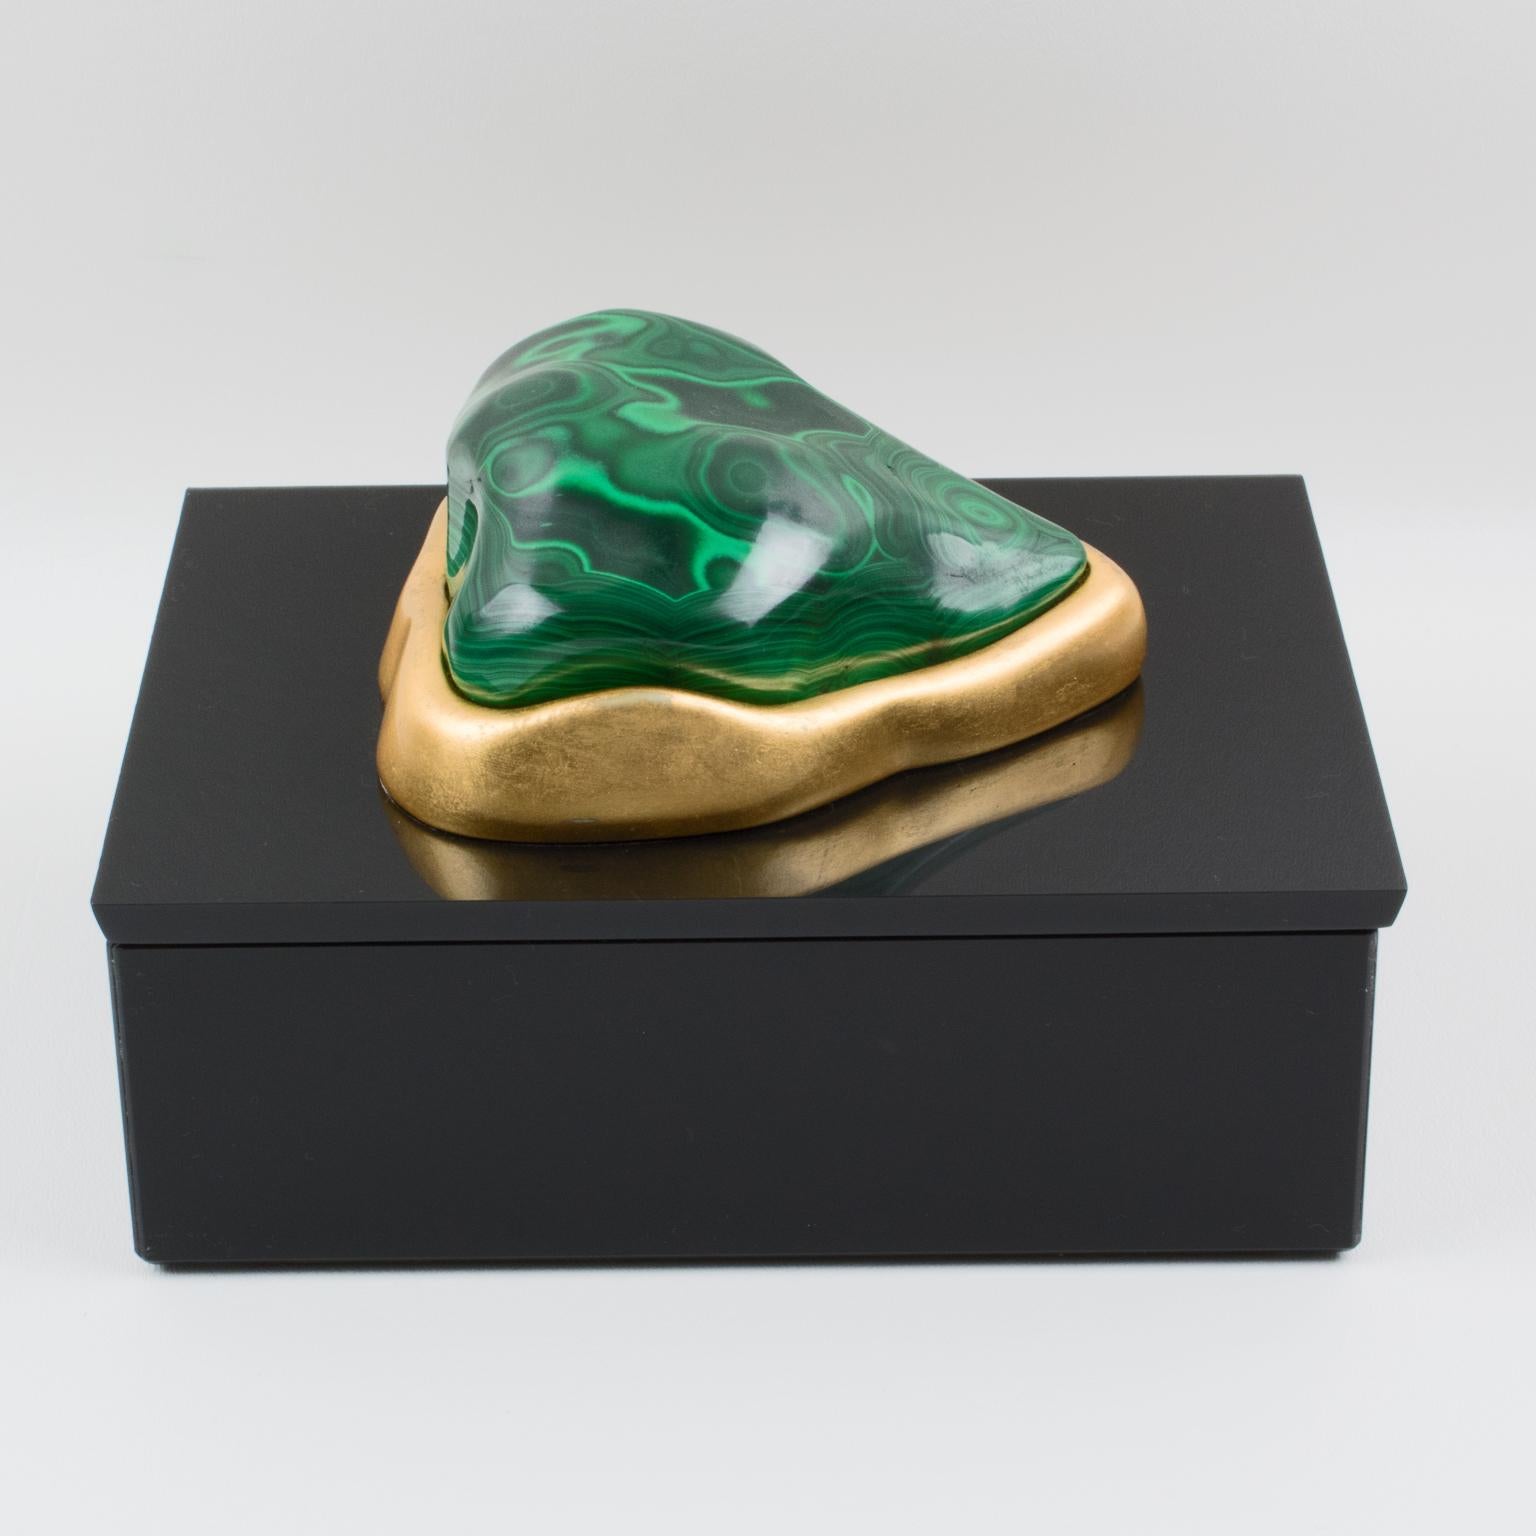 Known as the Demeter Malachite box, this refined decorative box by Eduardo Garza Studio is individually hand-made in New York City. Black Lucite box crowned with uniquely shaped Malachite stone individually mounted in a sculpted setting. The mounted